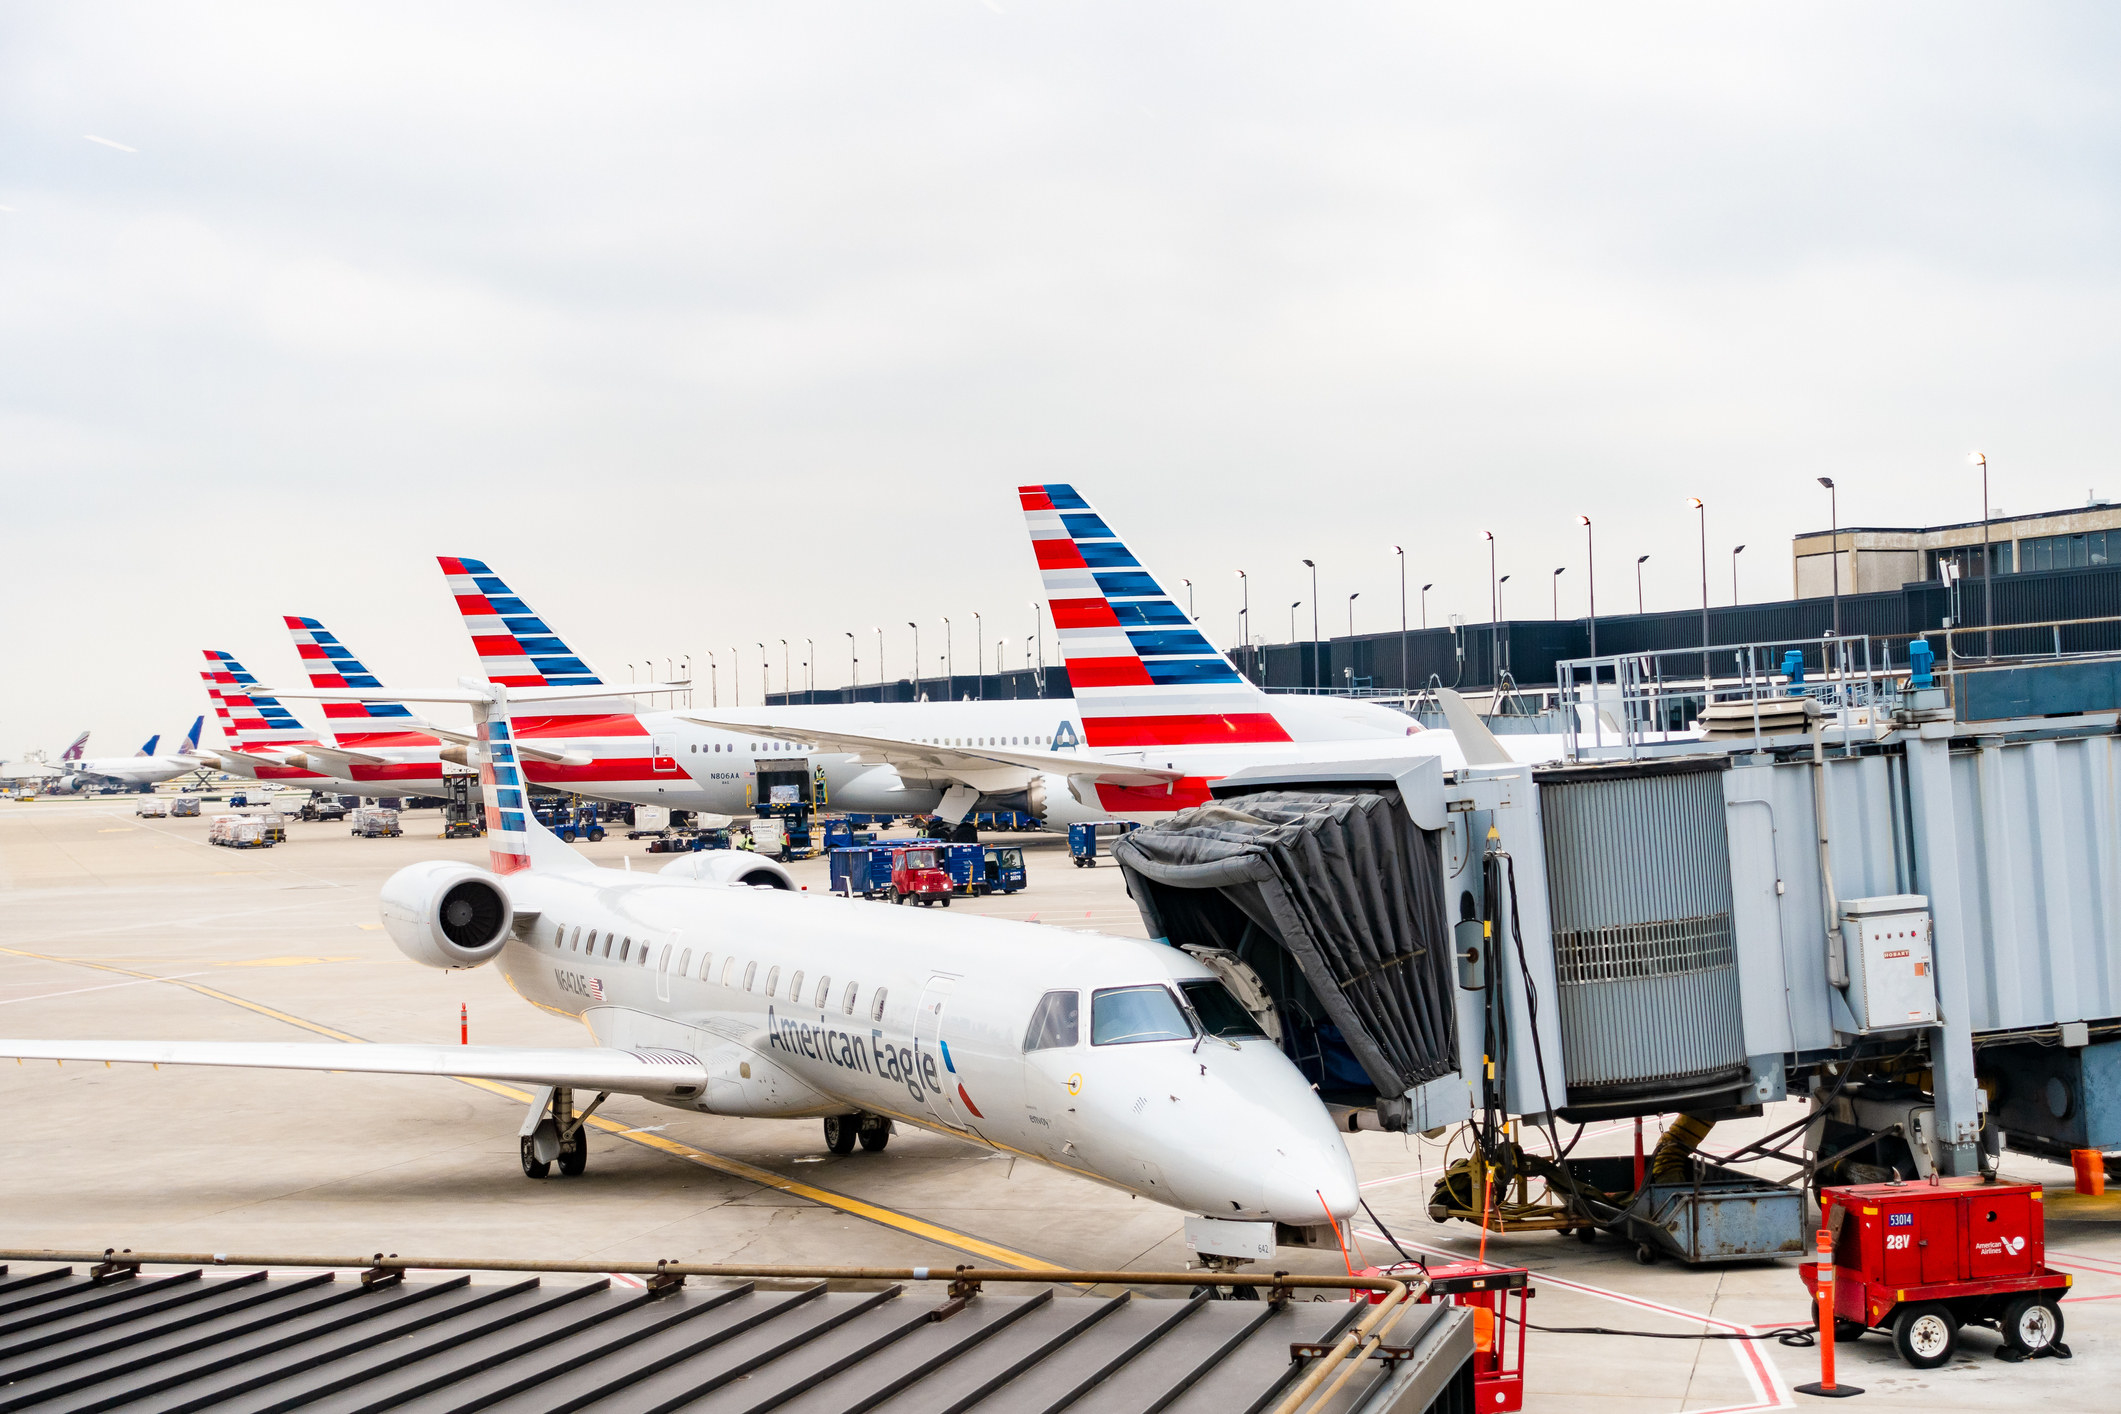 A line of American Airline planes